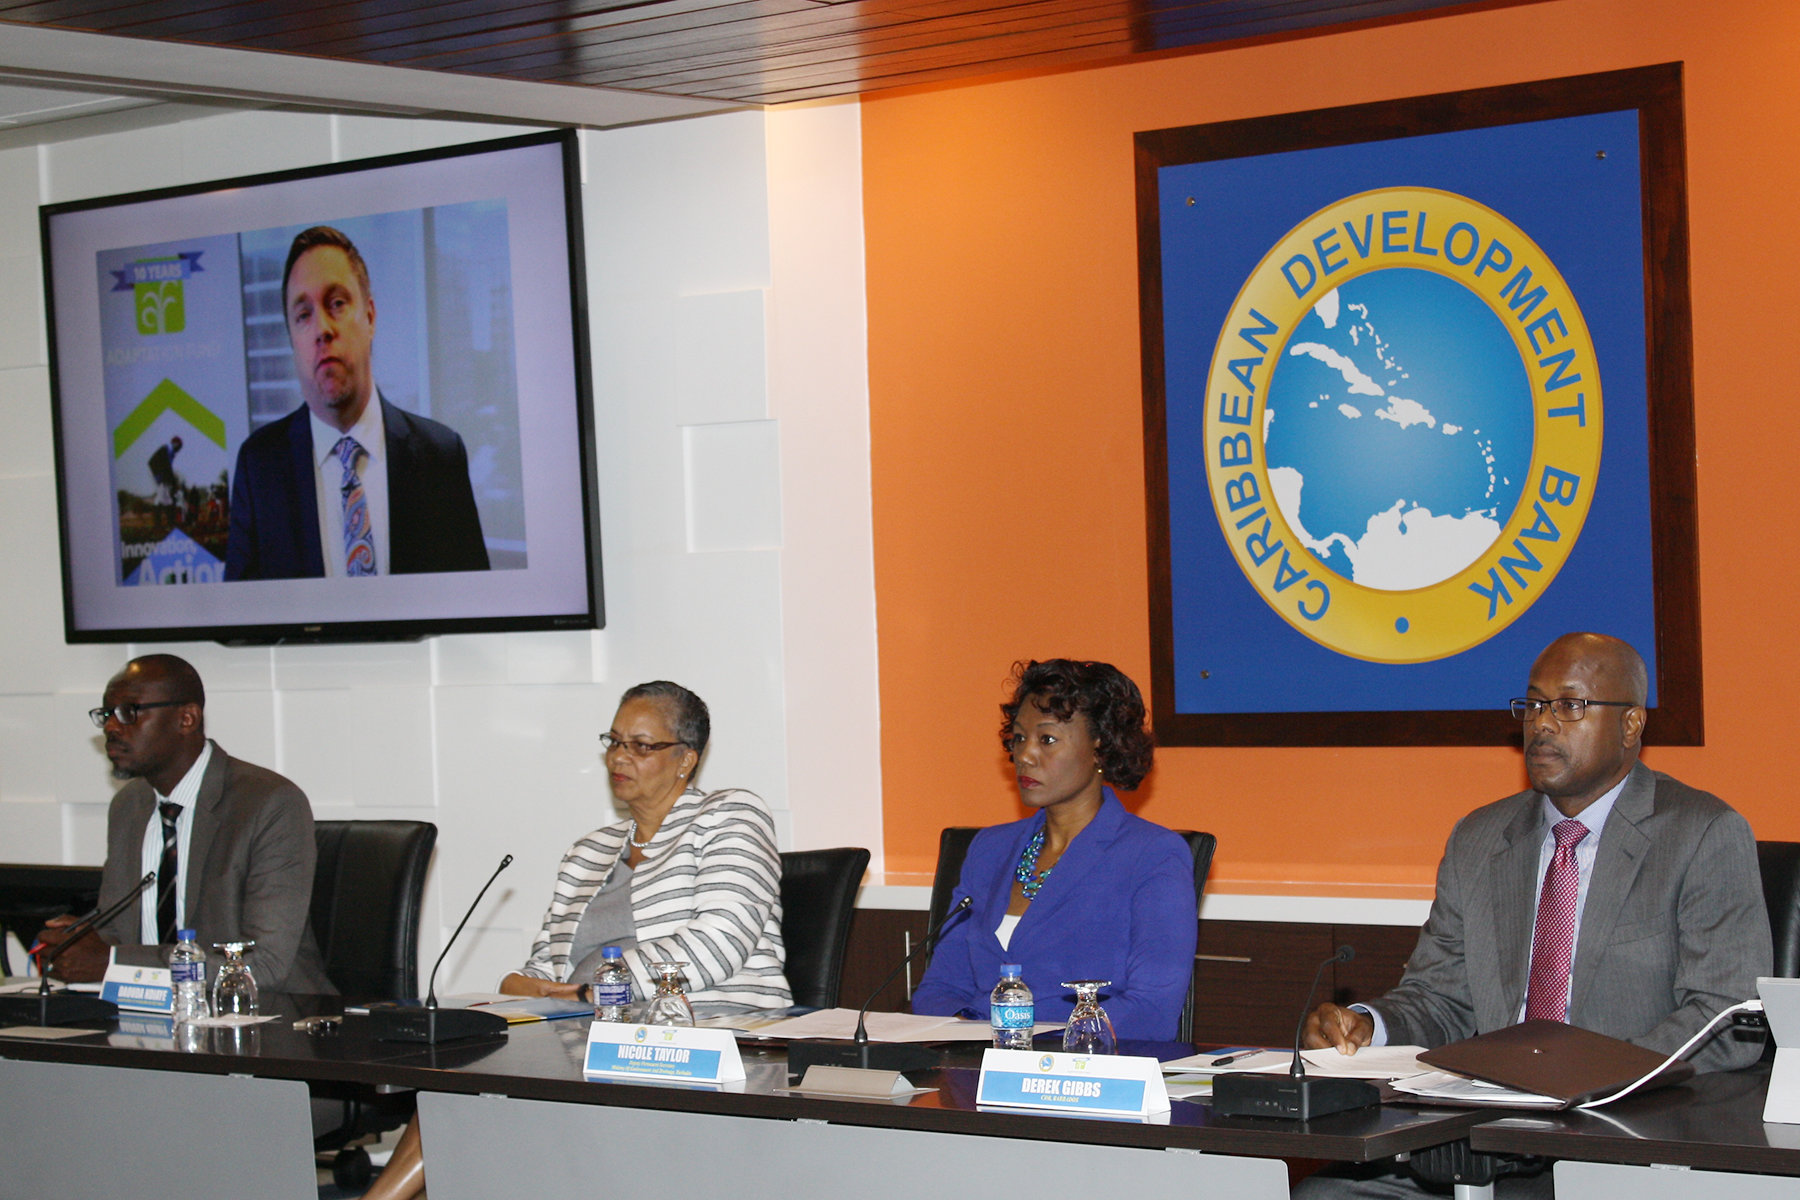 Left to right: Daouda N’Diaye, Senior Climate Change Specialist, Adaptation Fund; Monica La Bennett, Vice President Operations, CDB; Nicole Taylor, Deputy Permanent Secretary, Ministry of Environment and Drainage, Barbados and Derek Gibbs, Climate Finance Specialist, CDB.